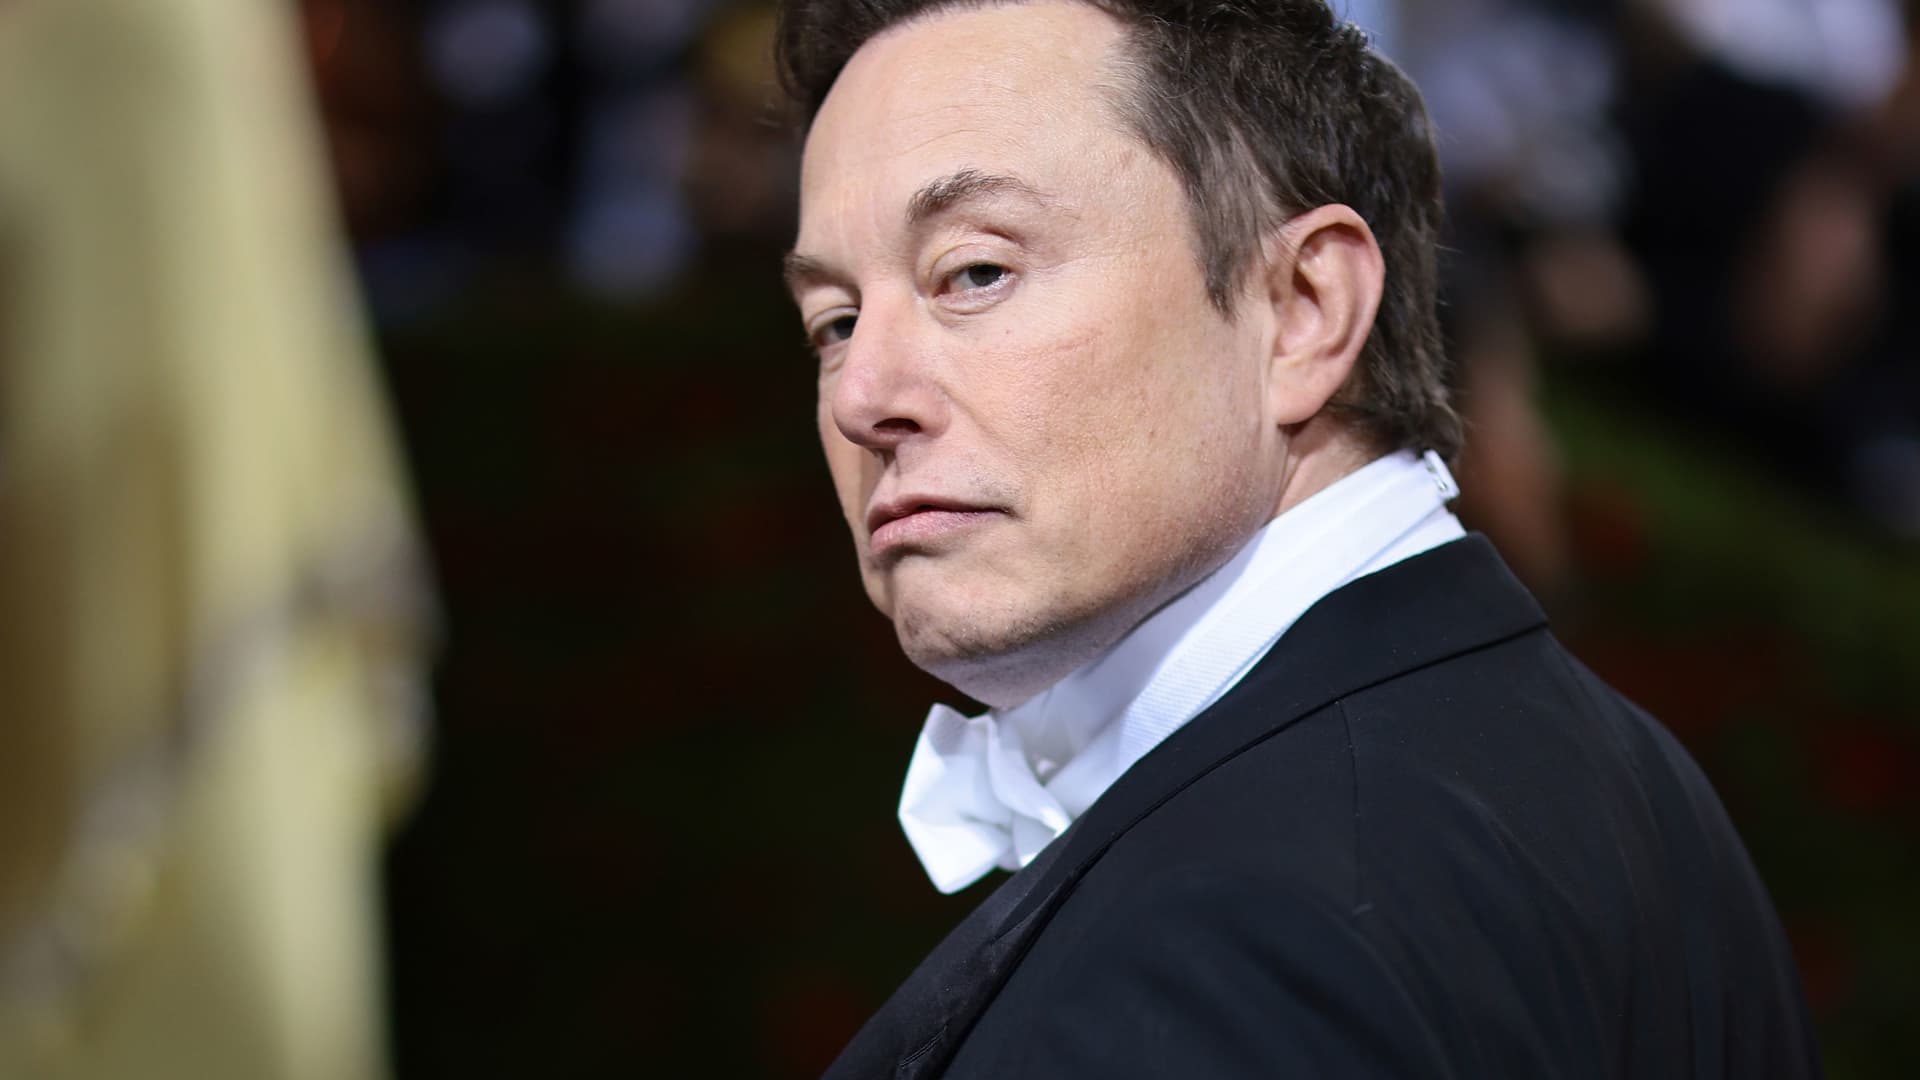 elon-musk-led-twitter-has-been-sued-by-at-least-six-companies-for-failing-to-pay-bills